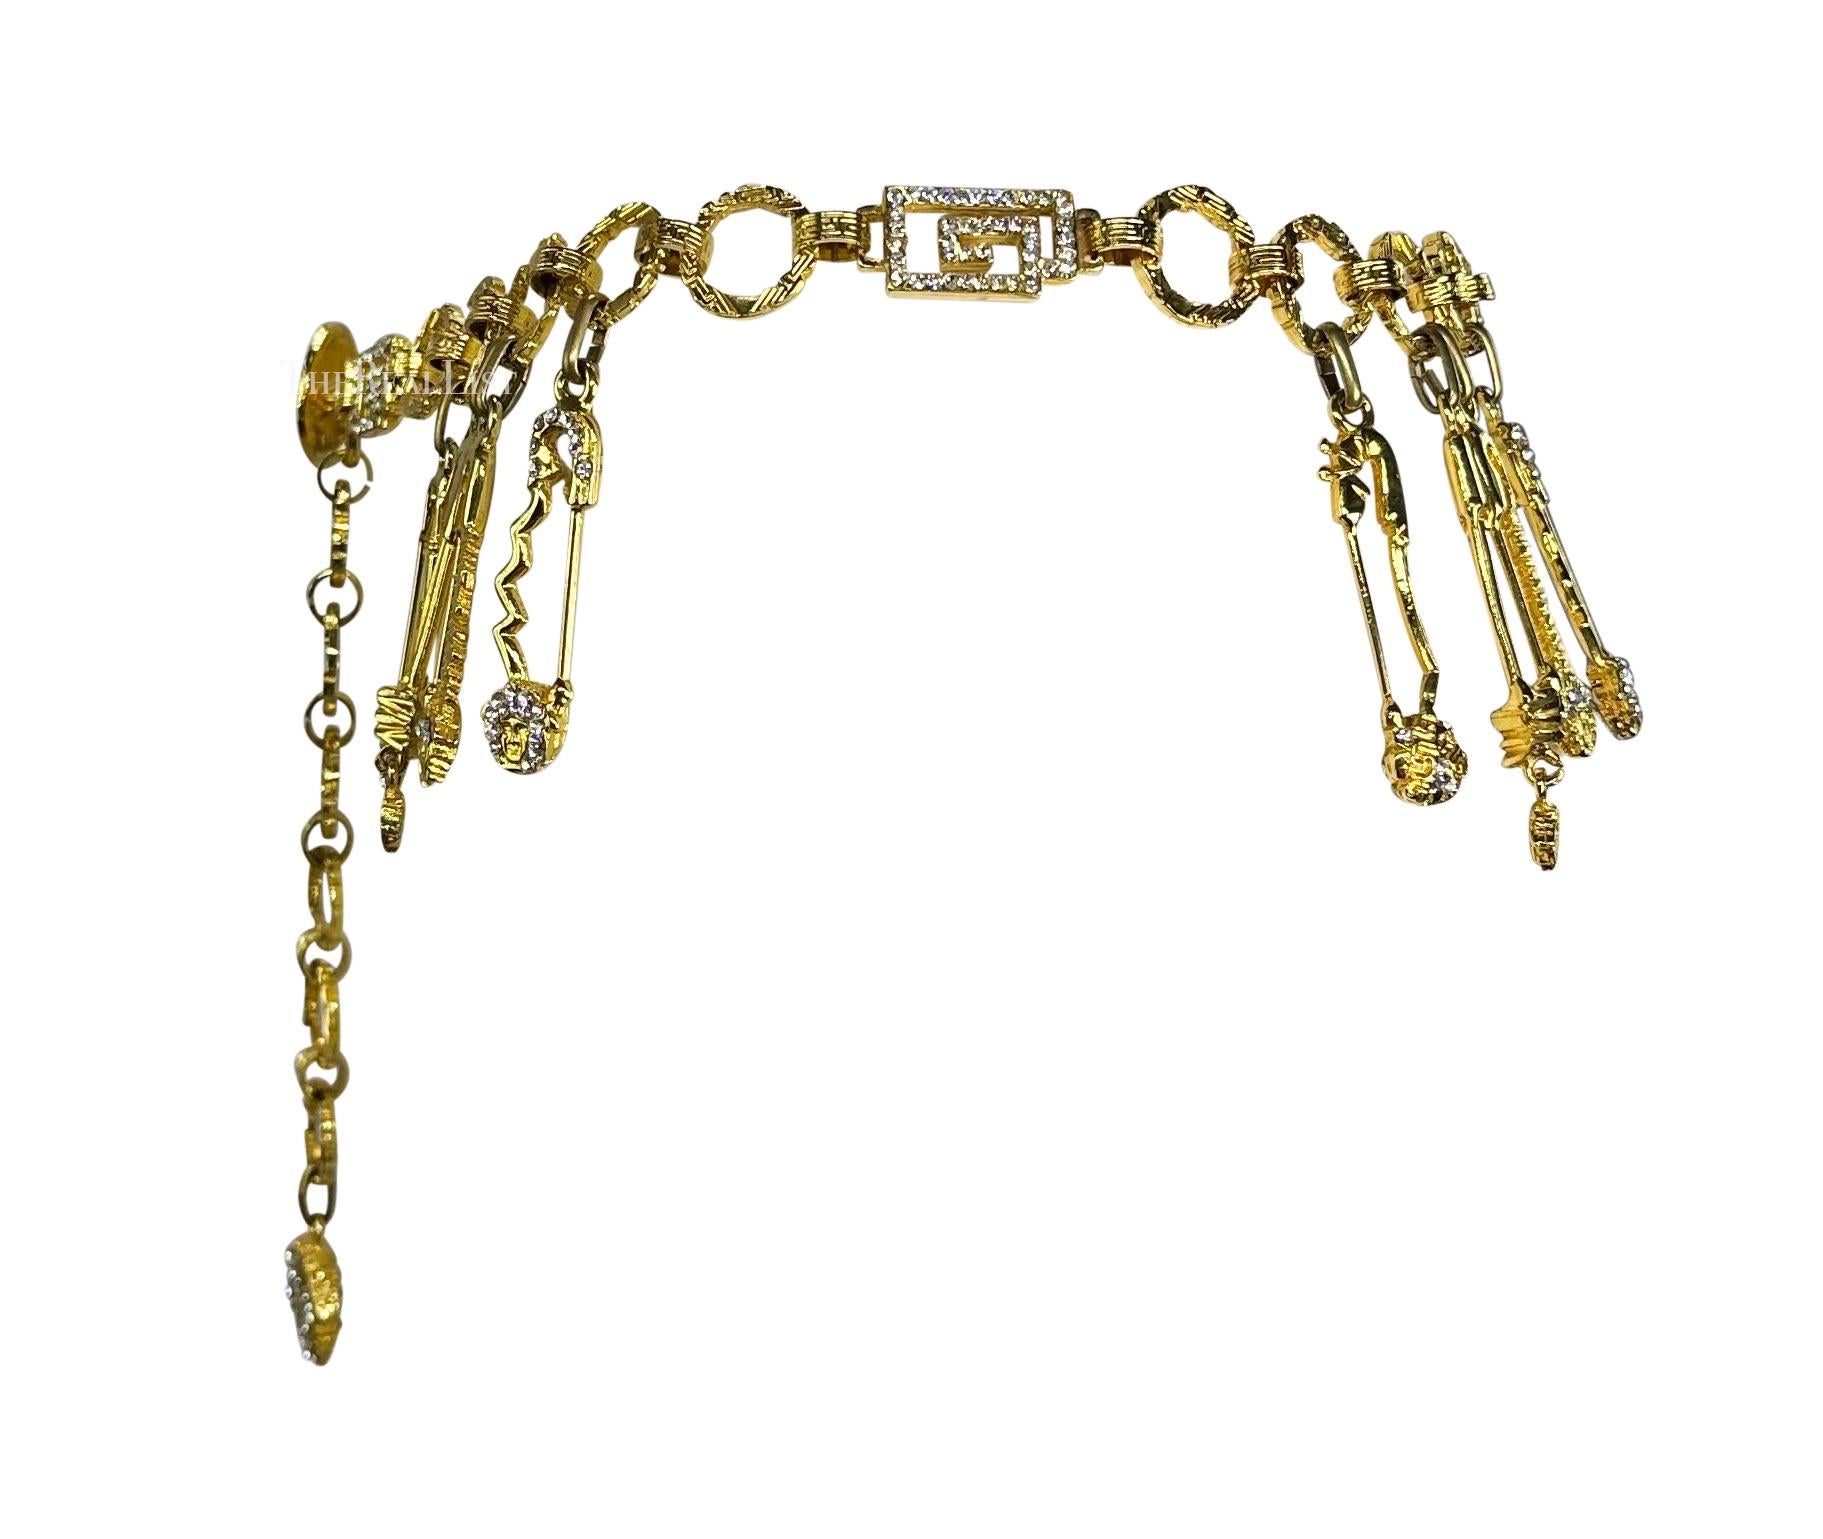 S/S 1994 Gianni Versace Gold Tone Rhinestone Safety Pin Medusa Chain Belt  For Sale 1